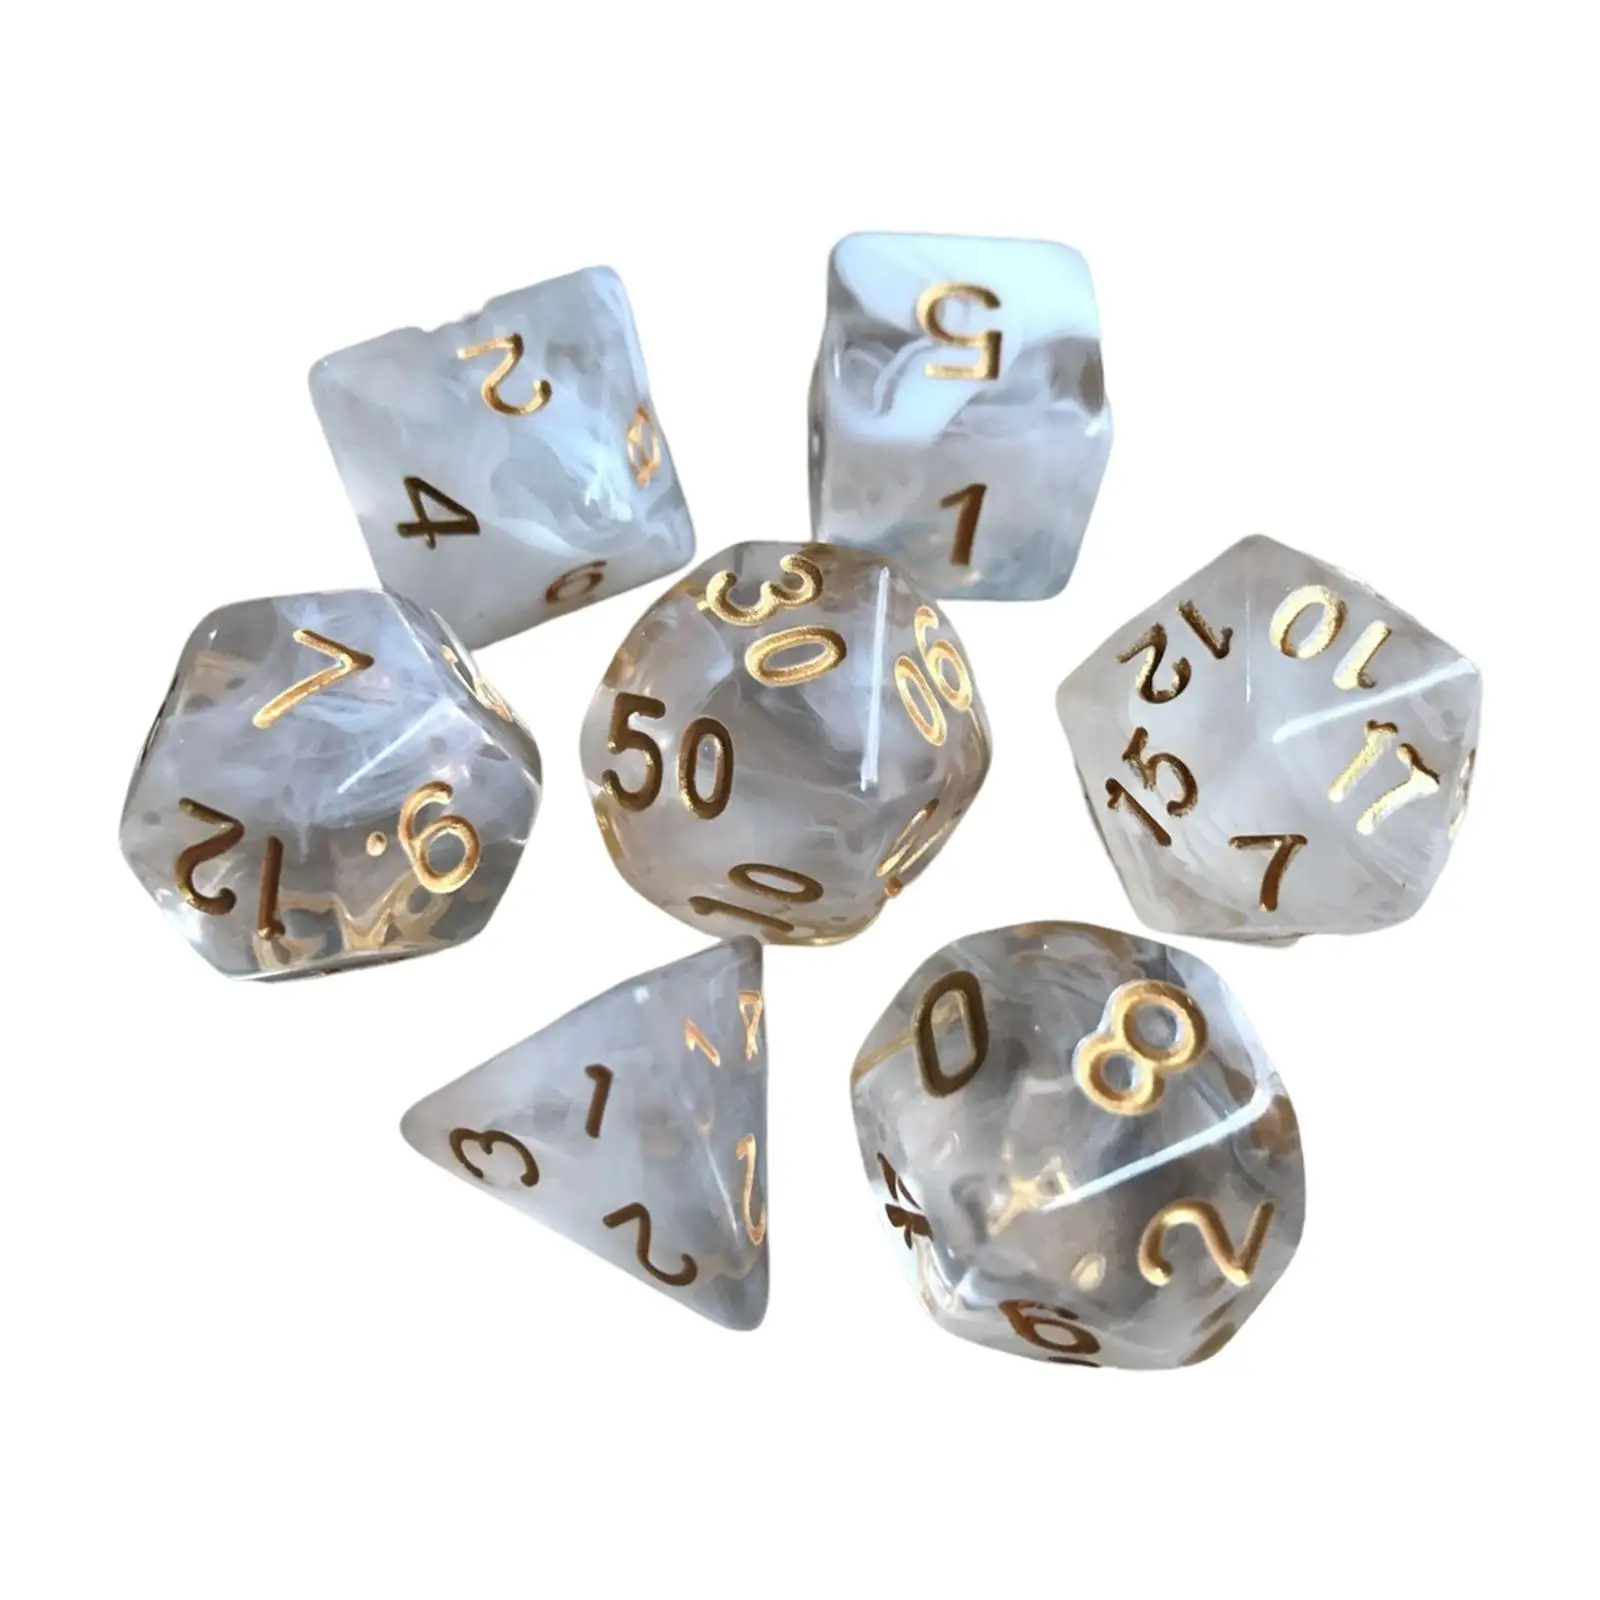 7x Acrylic Polyhedral   Game for  Game Table Board Math Teaching